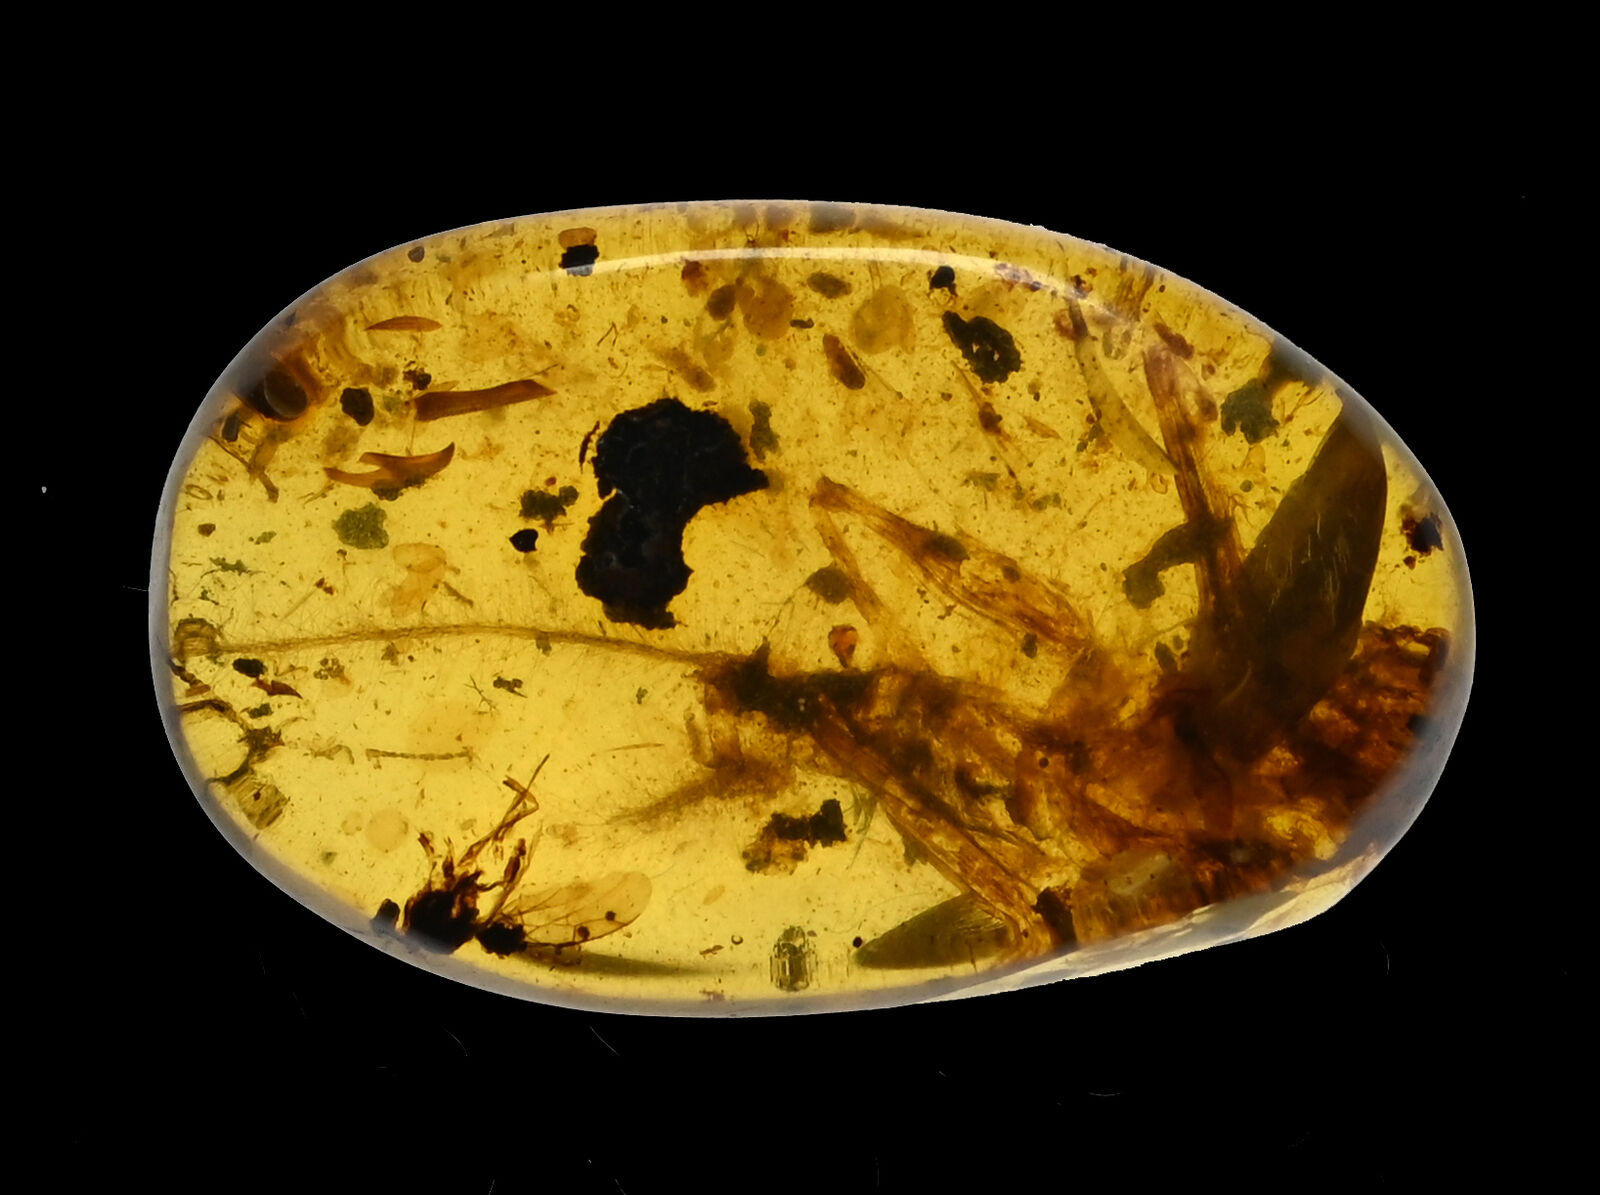 Large Orthoptera (Cricket), Fossil insect inclusion in Burmese Amber